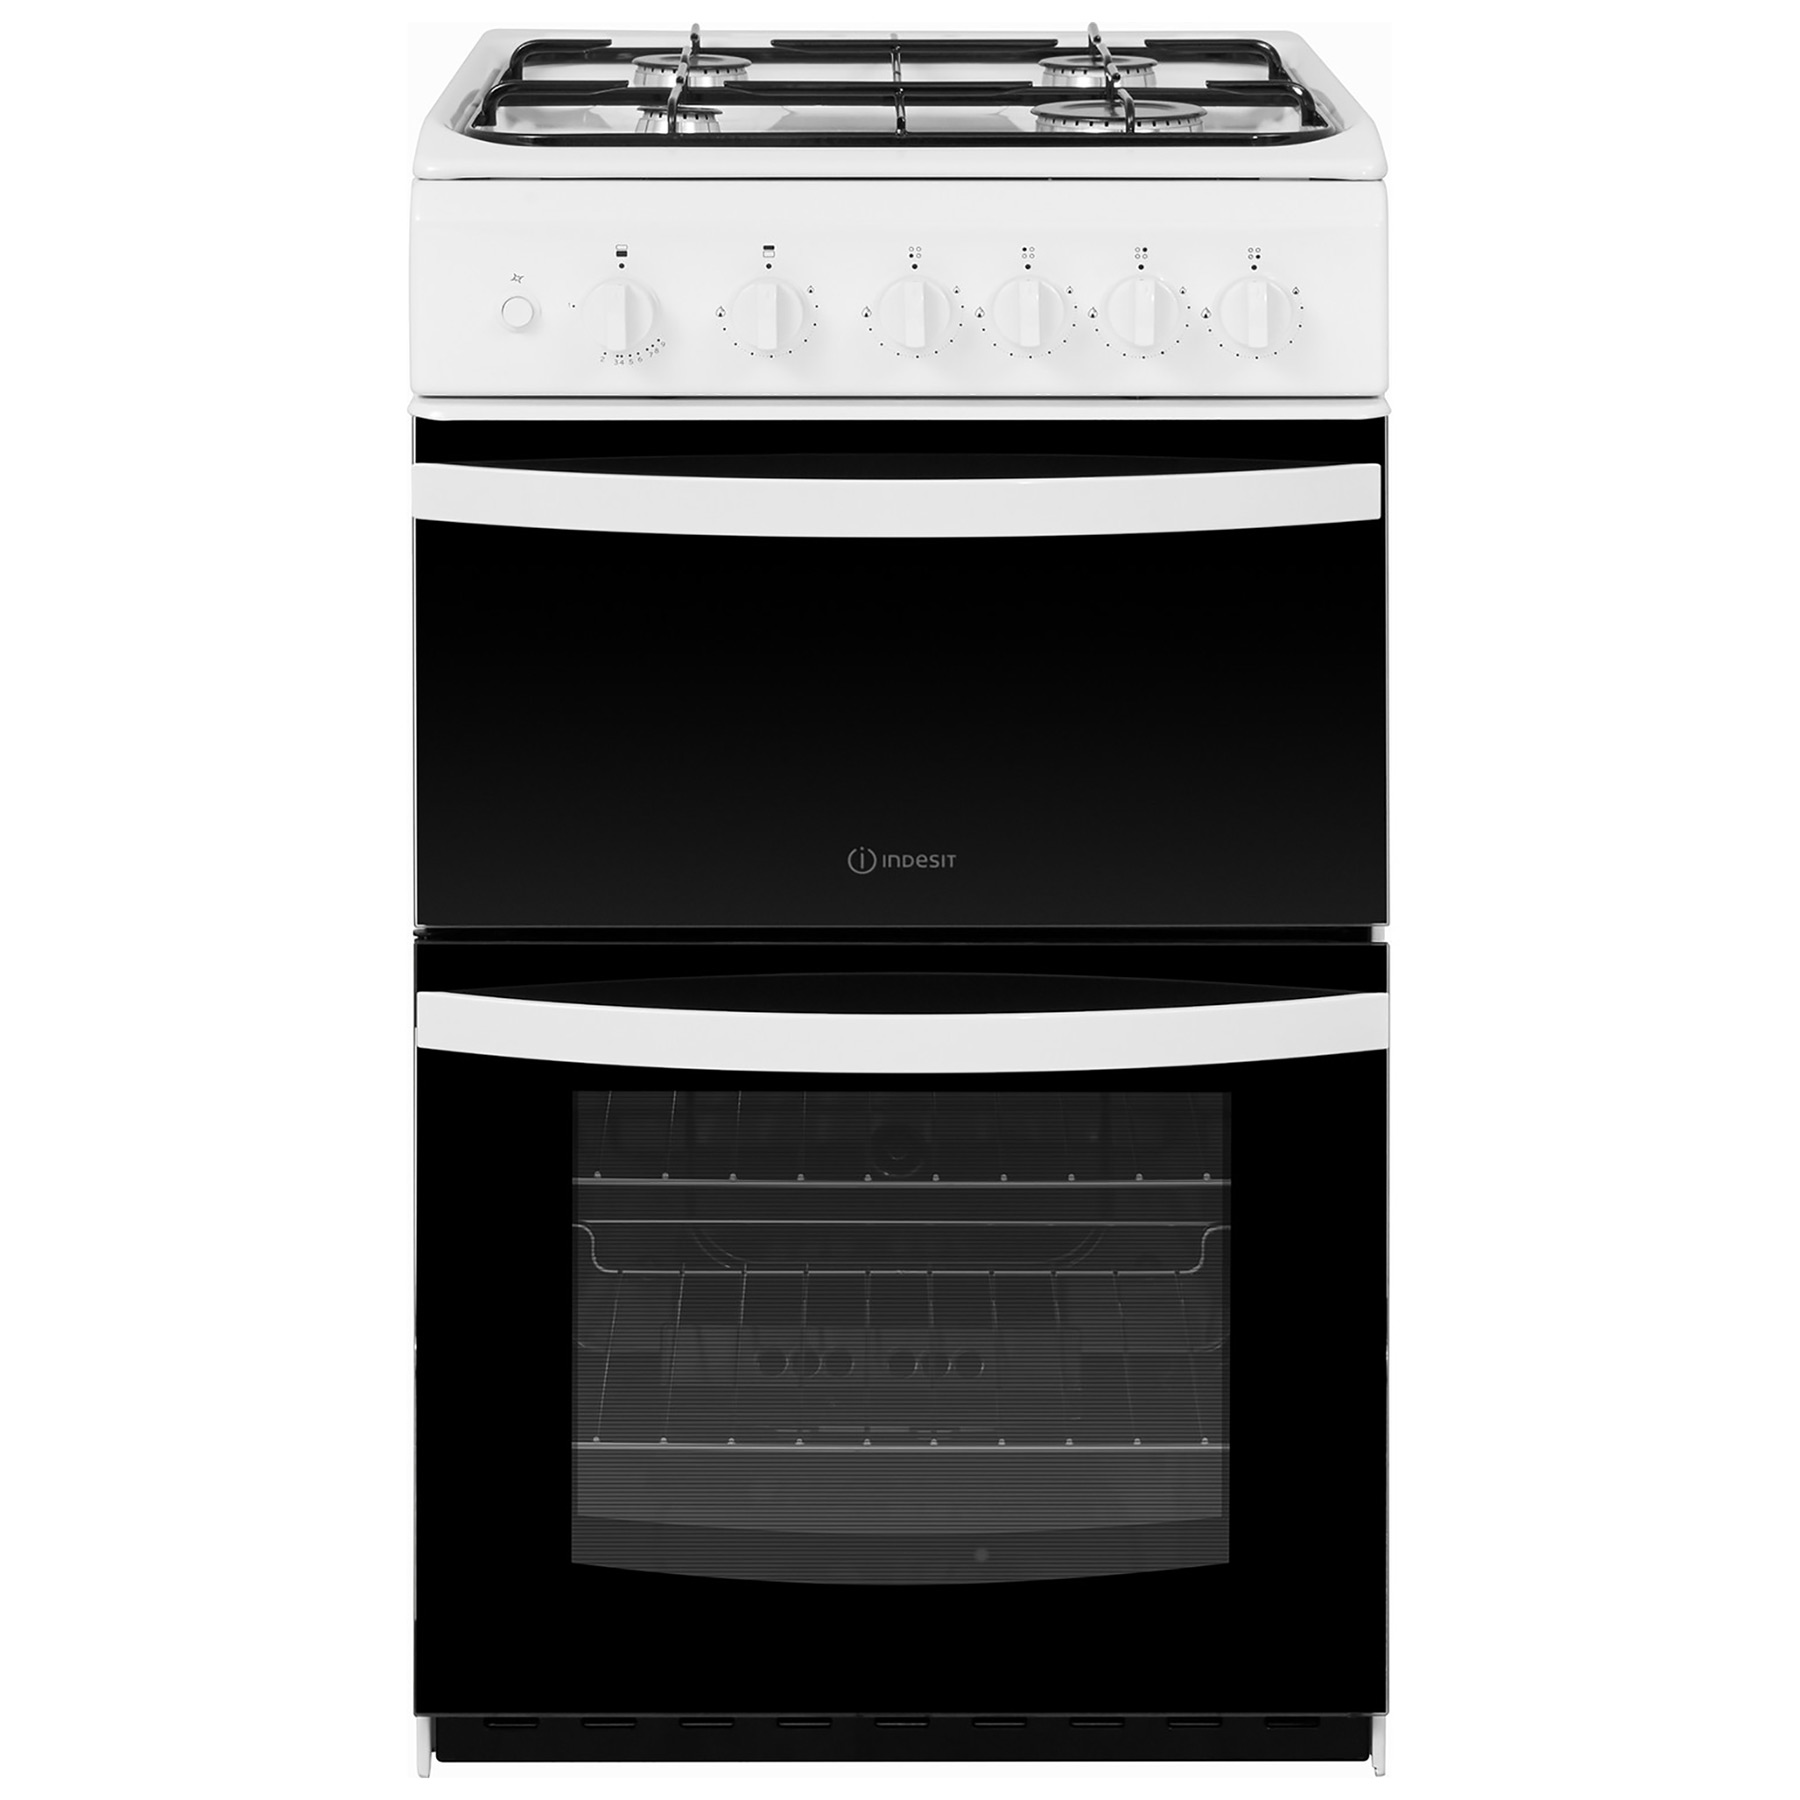 Image of Indesit ID5G00KMW 50cm Twin Cavity Gas Cooker in White 66 33L